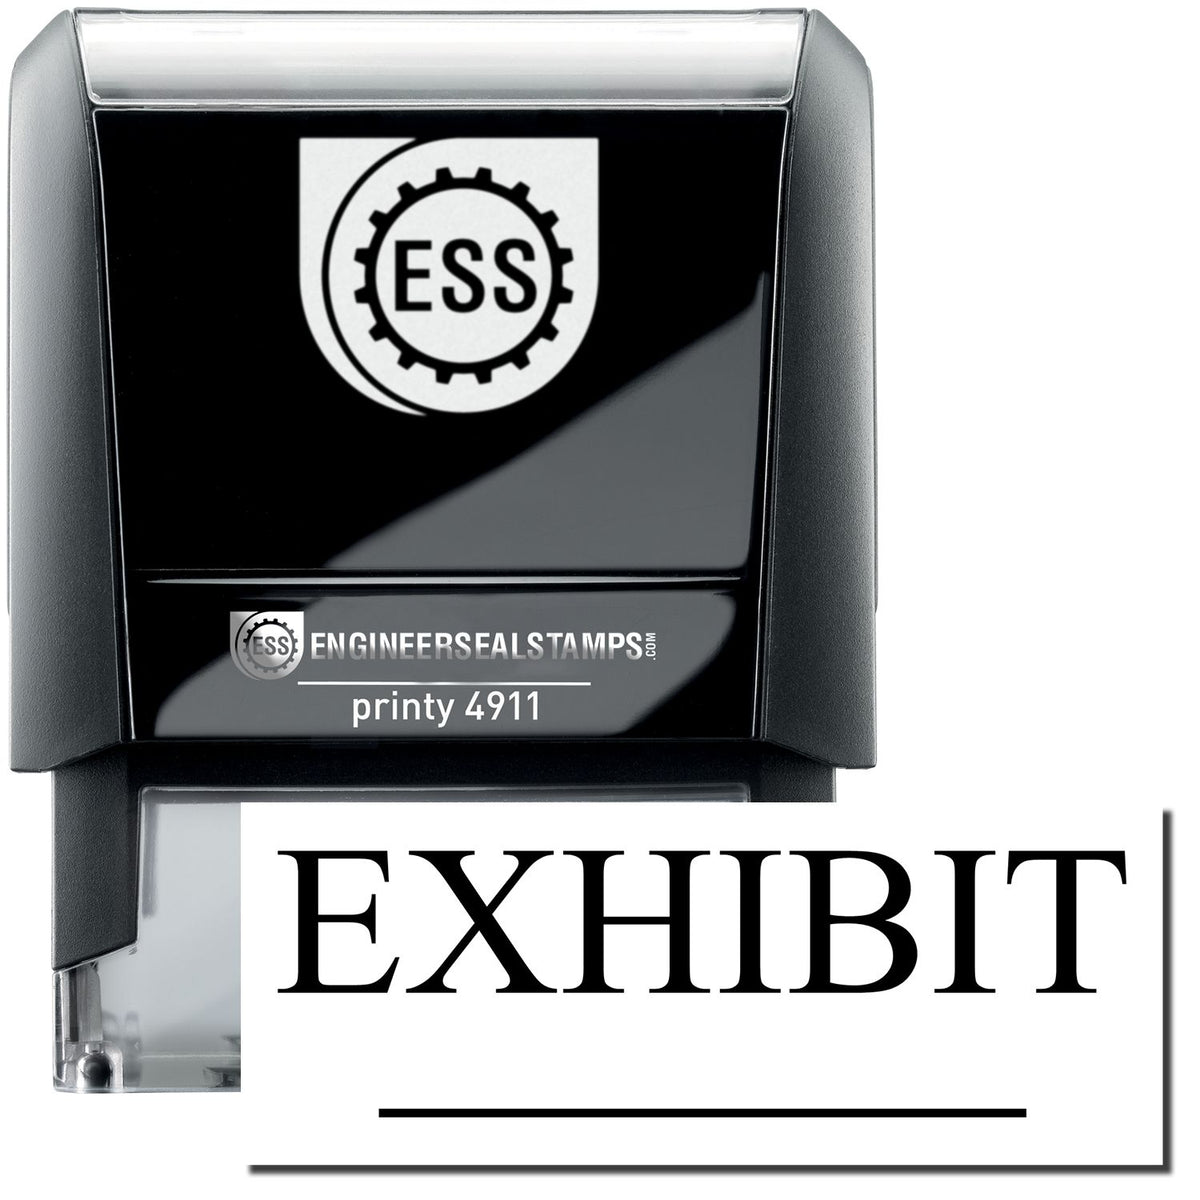 A self-inking stamp with a stamped image showing how the text &quot;EXHIBIT&quot; with a line under it is displayed after stamping.